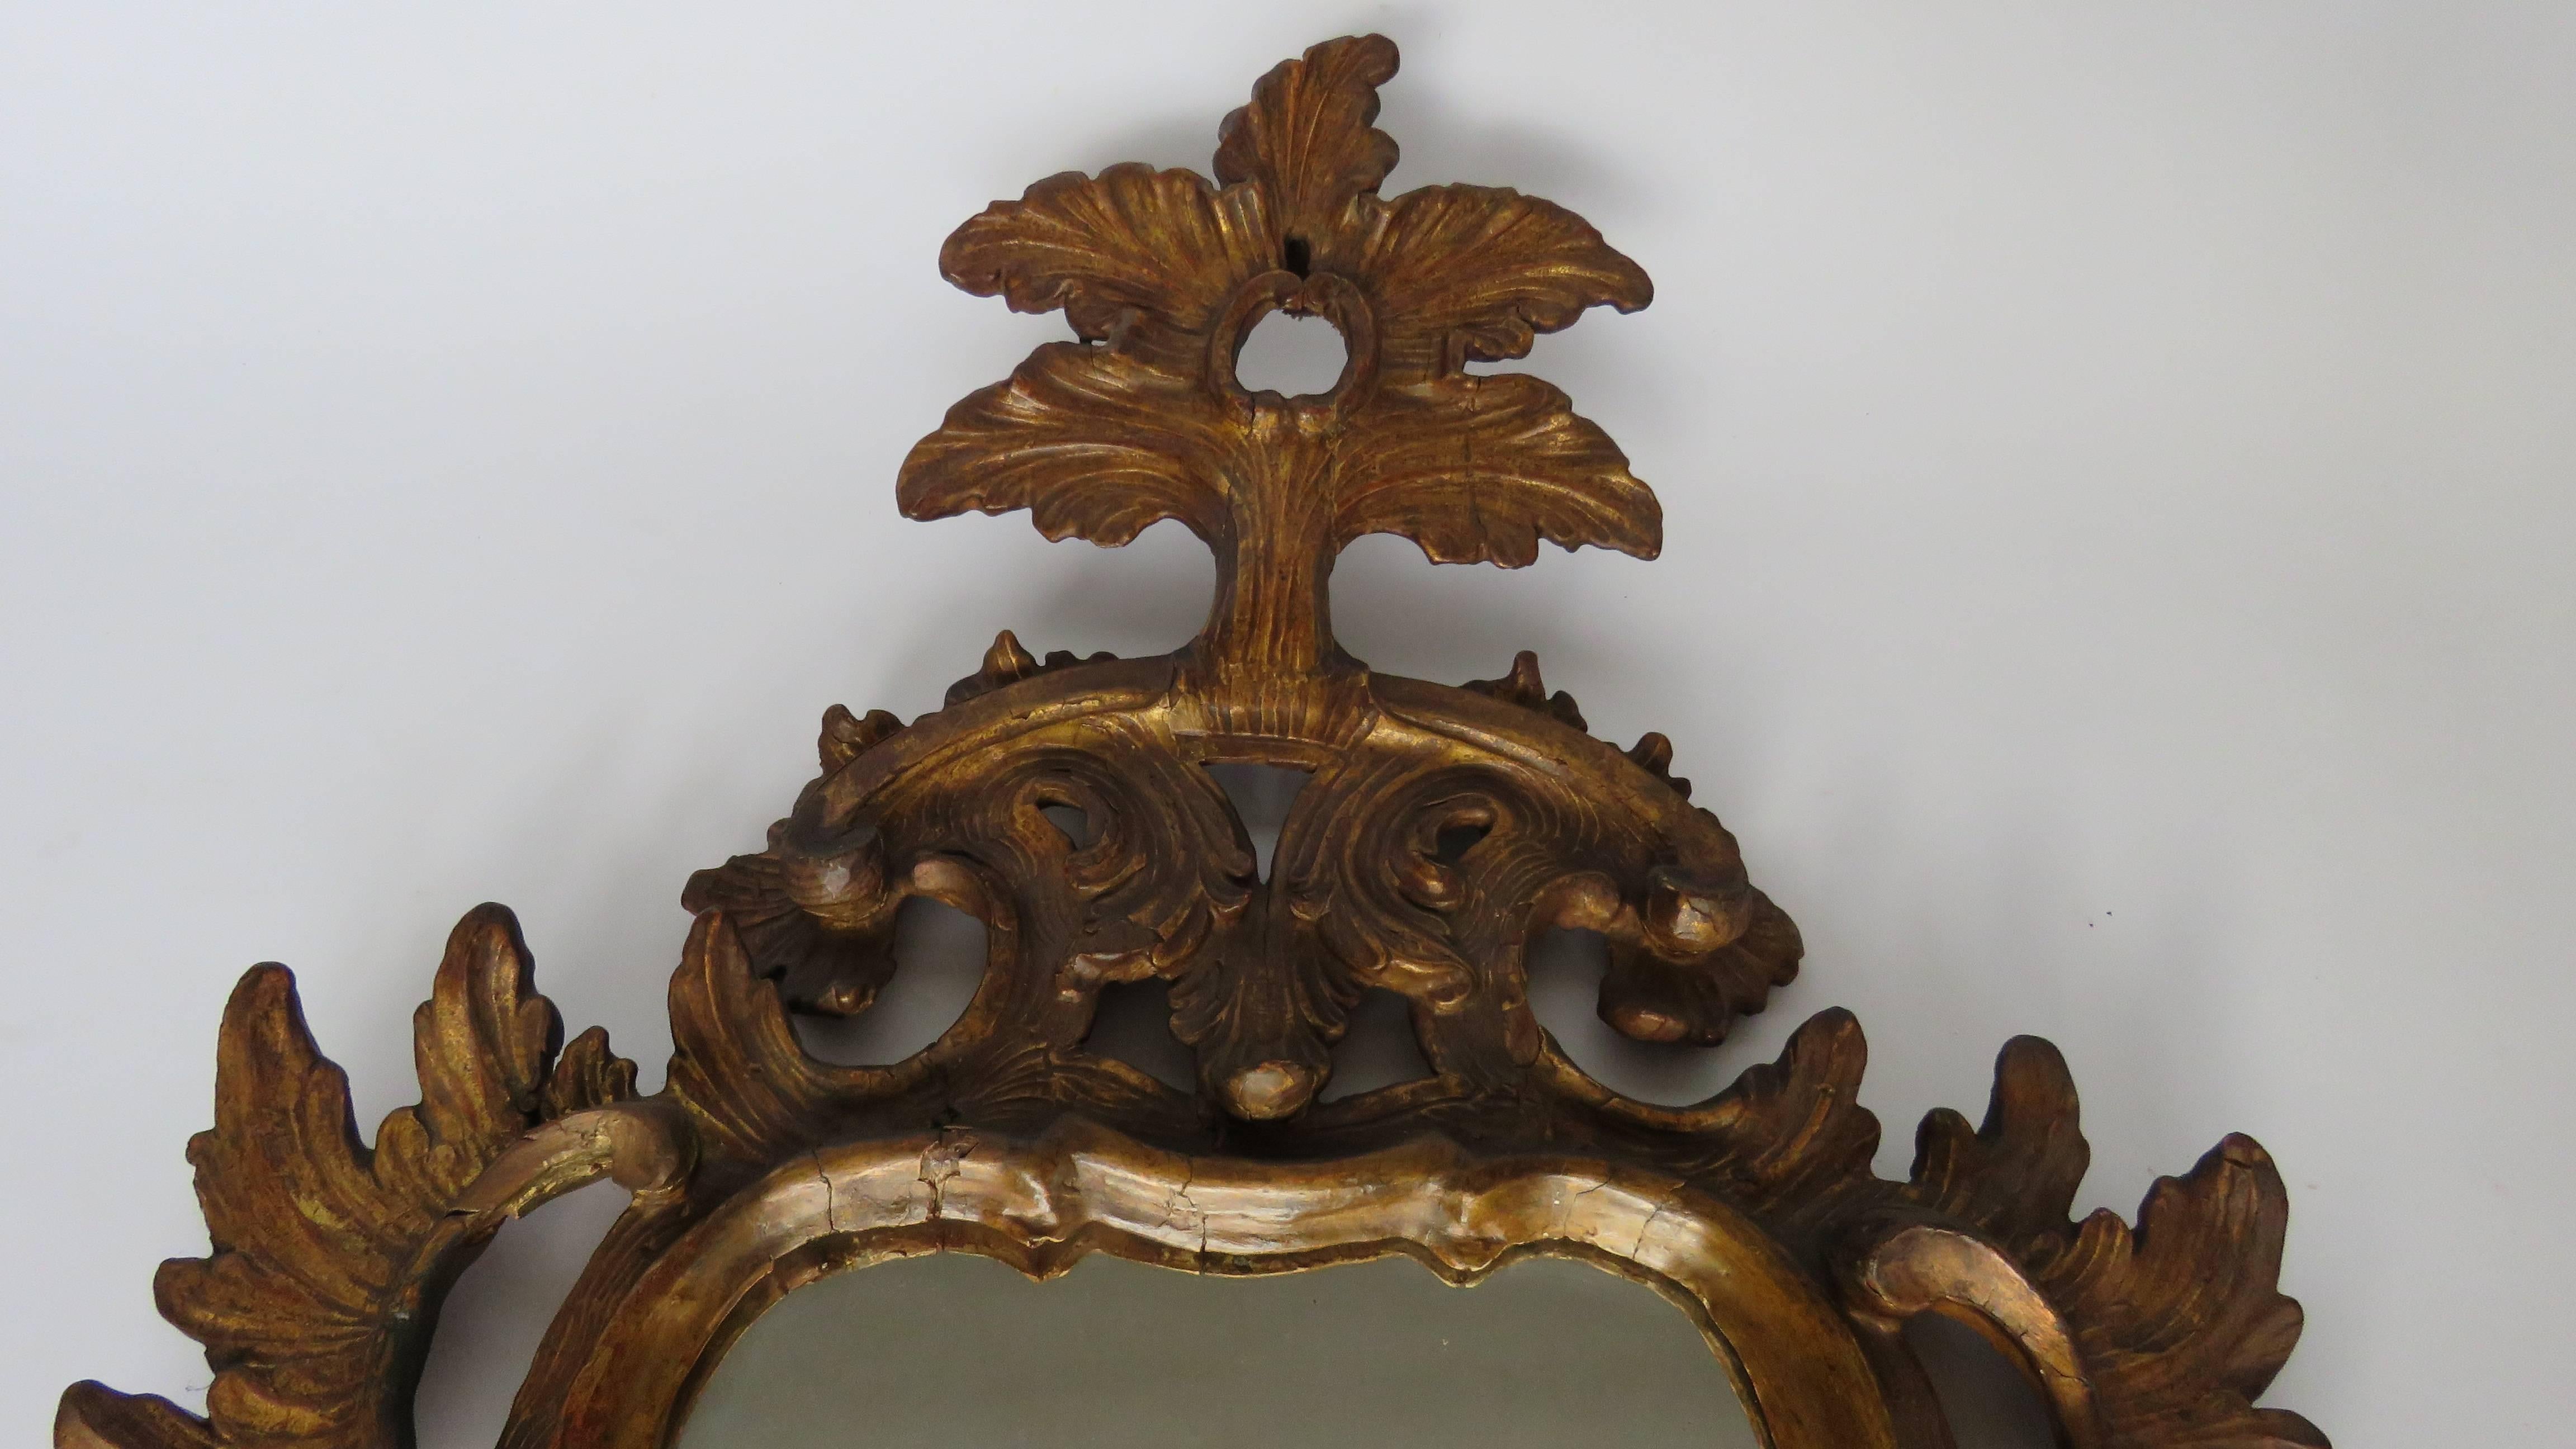 Each with cartouche shaped plate framed with gilt scrolling foliate vines surmounted by angled elongated plumed crests. Mirrors included.